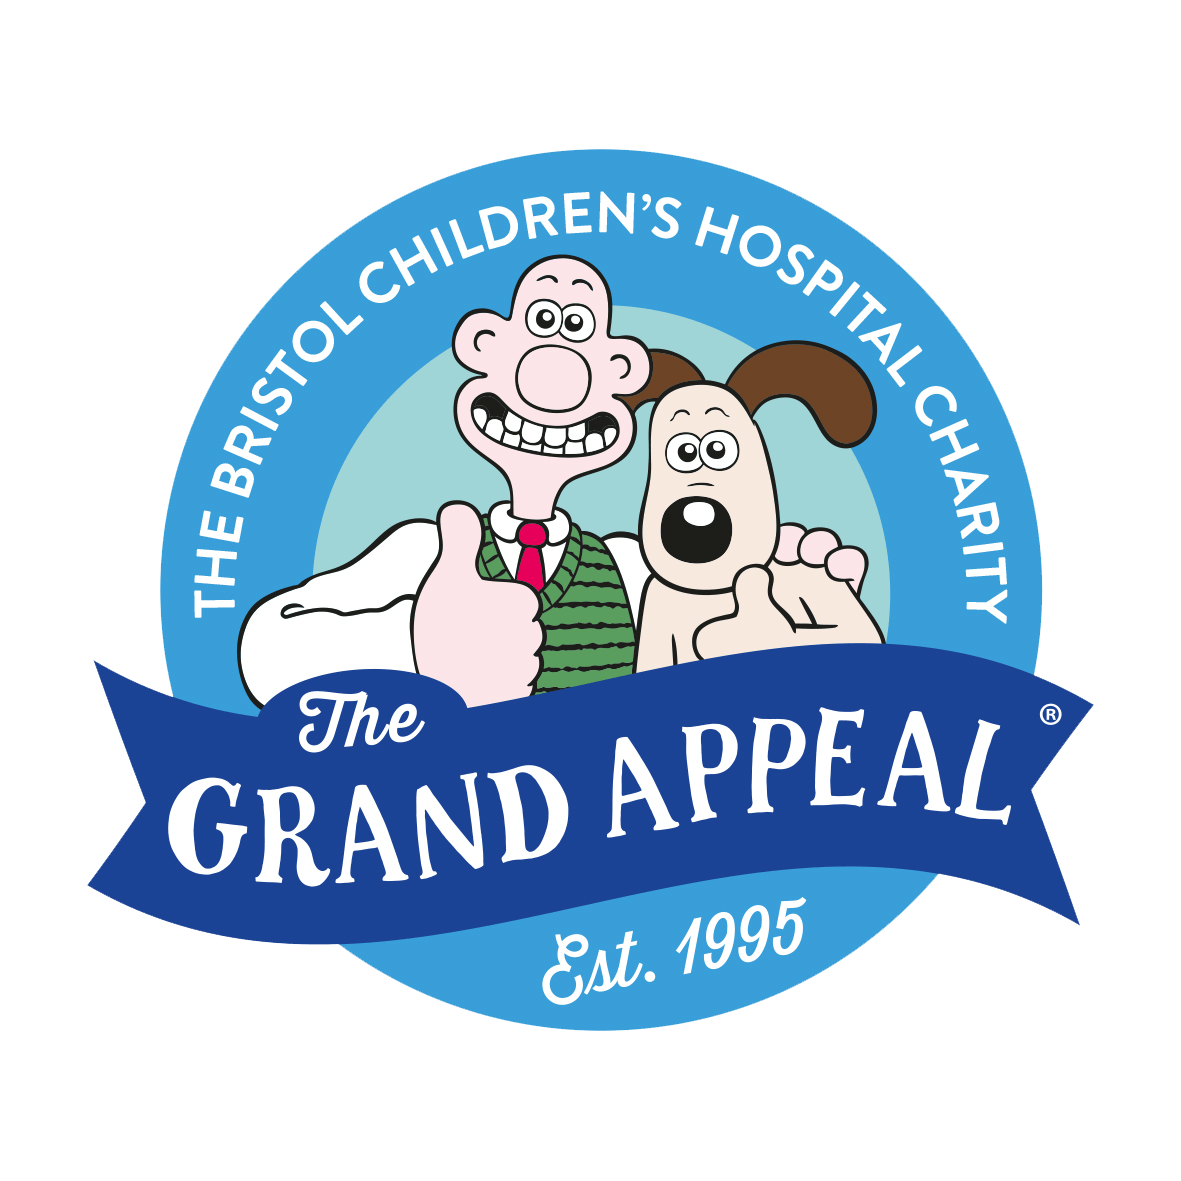 Grand Appeal